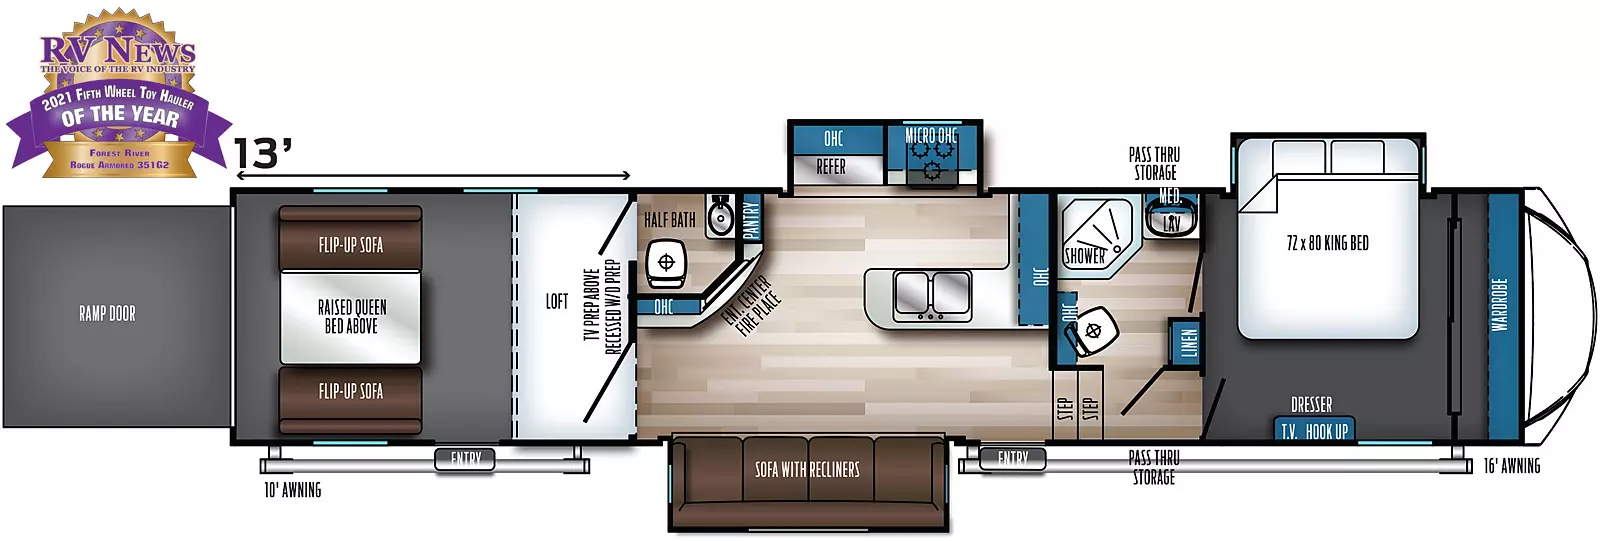 The 351G2 has three slideouts and two entries. Exterior features pass-through storage, rear ramp door, and 10 foot and 16 foot awnings. Interior layout front to back: front bedroom wardrobe, off-door side king bed slideout and door side dresser with TV hookup; off-door side full pass-through bathroom with medicine cabinet, linen closet and overhead cabinet; steps down to entry and main living area; peninsula kitchen counter with sink and overhead cabinet wraps to inner wall; off-door side slideout with cooktop, microwave, overhead cabinet, and refrigerator; door side sofa with recliners slideout; pantry, entertainment center with fireplace, and overhead cabinet along inner wall; rear garage with half bathroom, loft, TV prep above recessed washer/dryer prep, second entry, and opposing flip-up sofas with raised queen bed above.